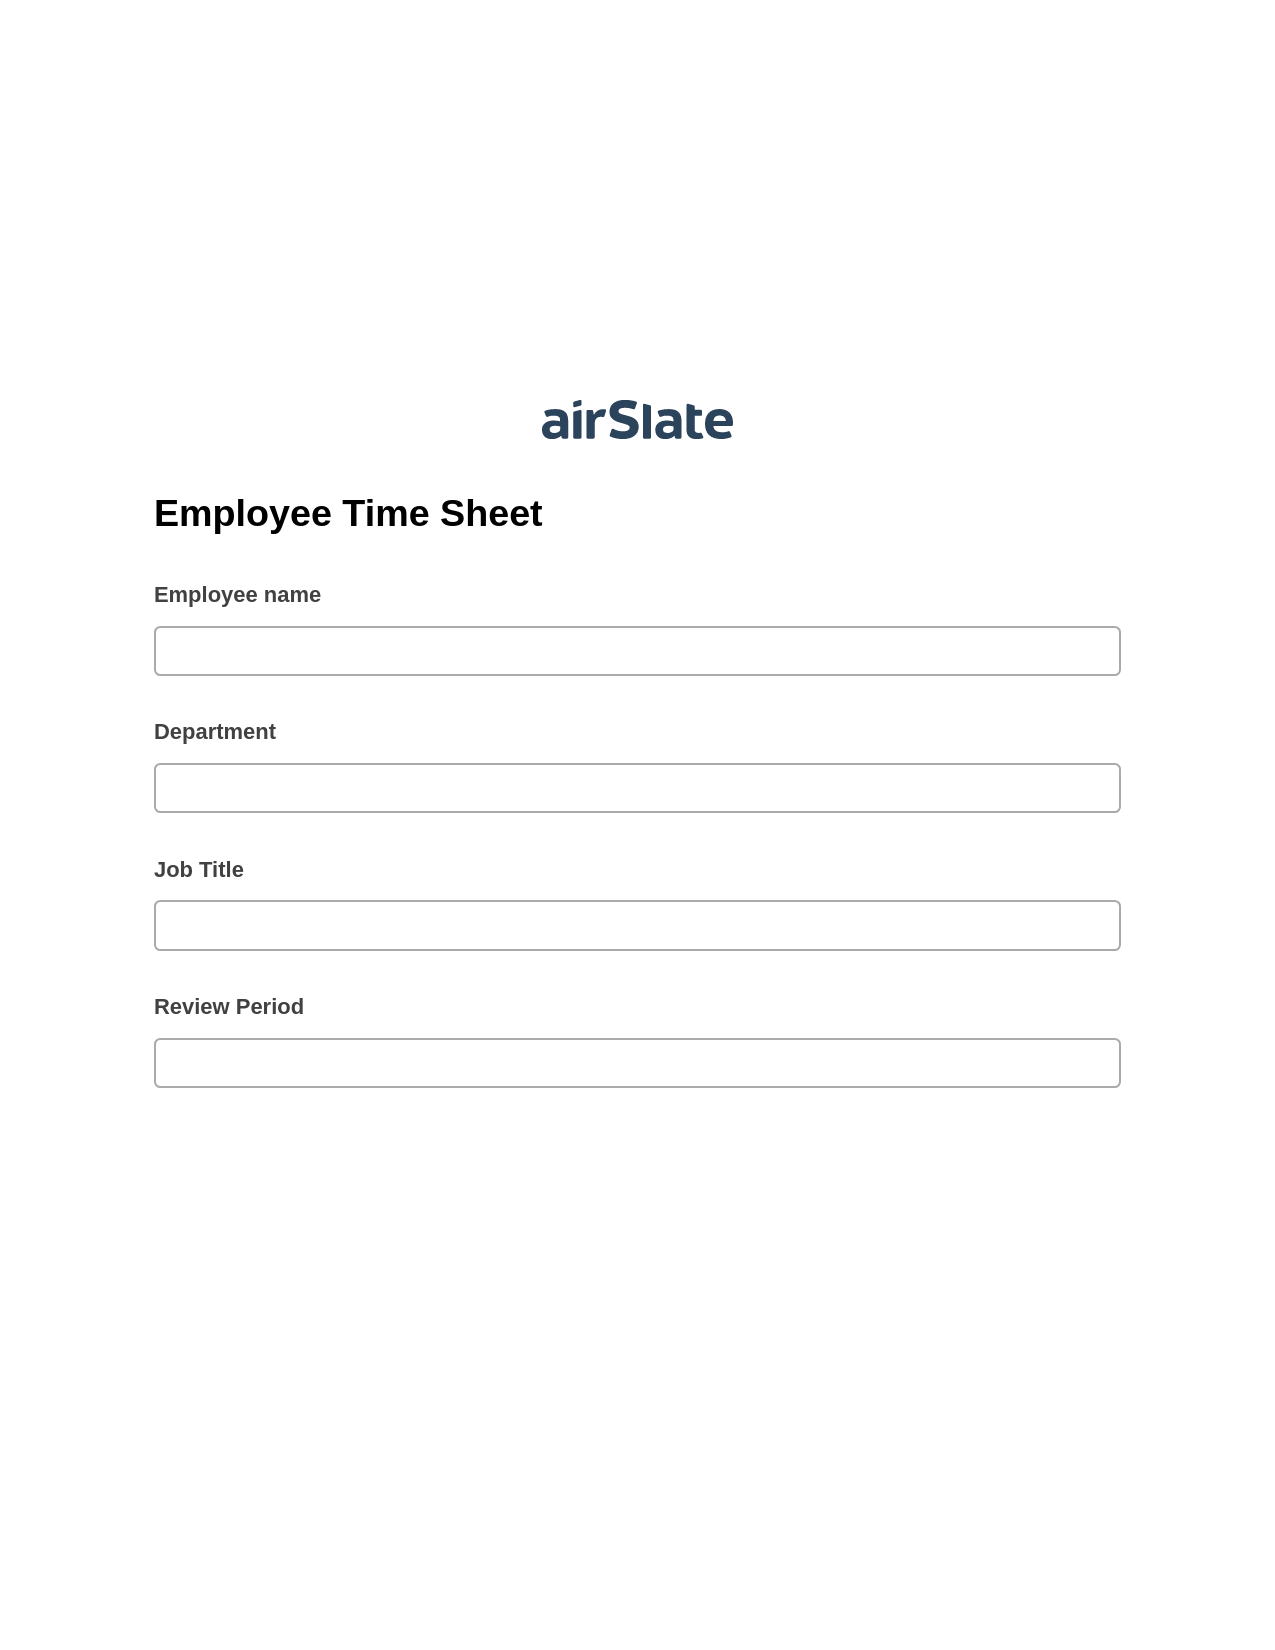 Employee Time Sheet Pre-fill from another Slate Bot, Rename Slate Bot, Archive to OneDrive Bot